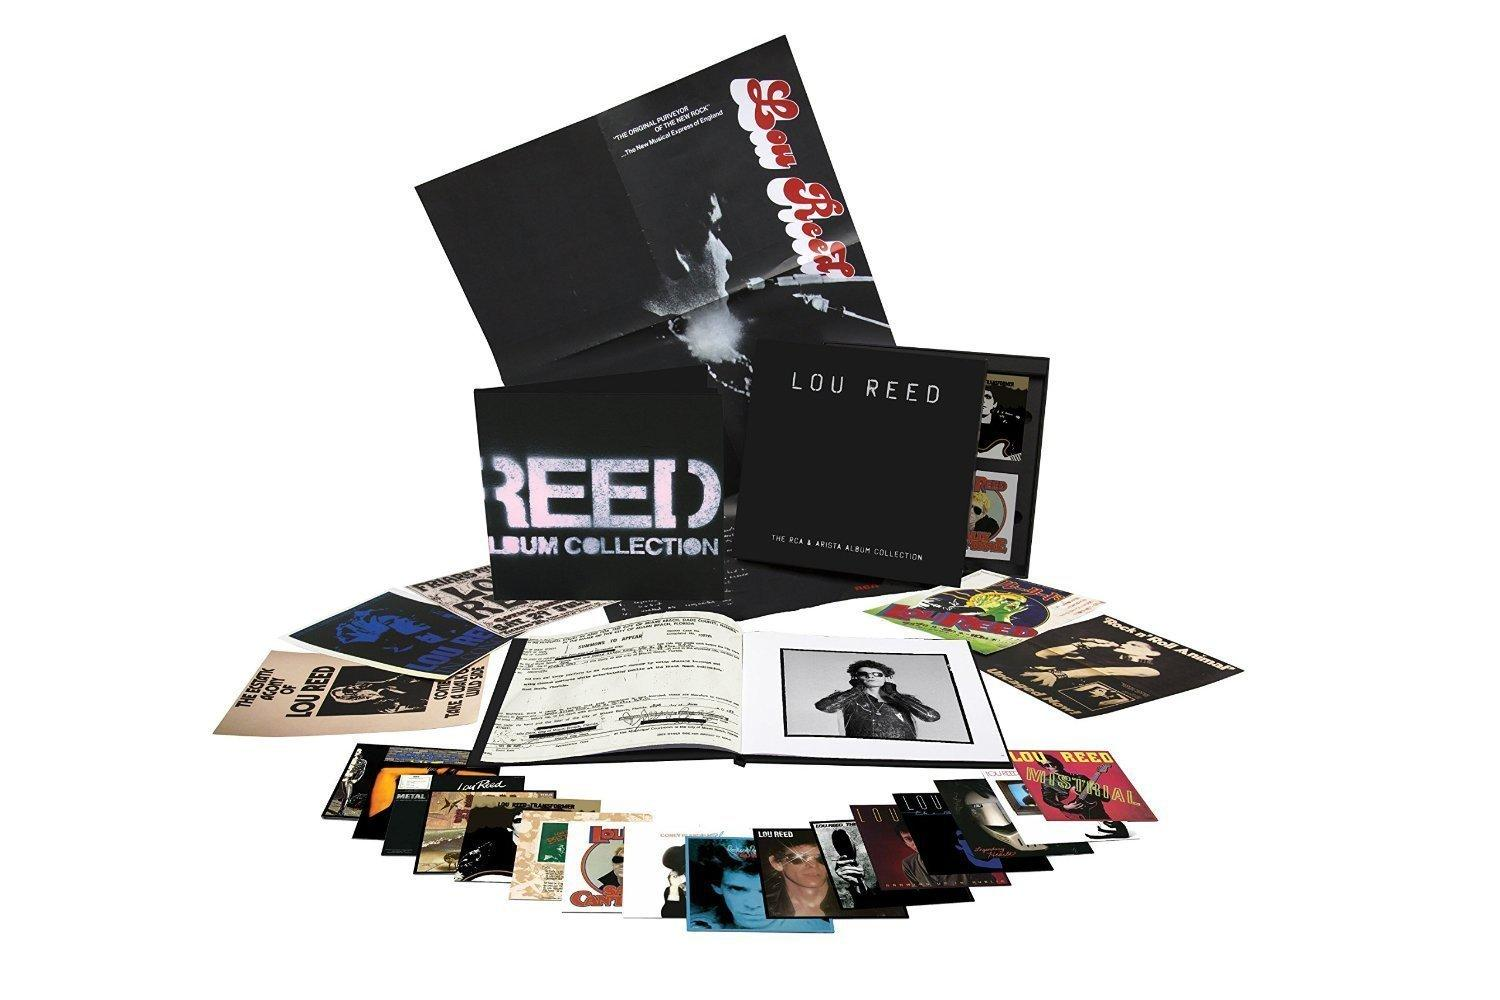 Lou Reed - Arista (CD) - RCA The & Collection Albums